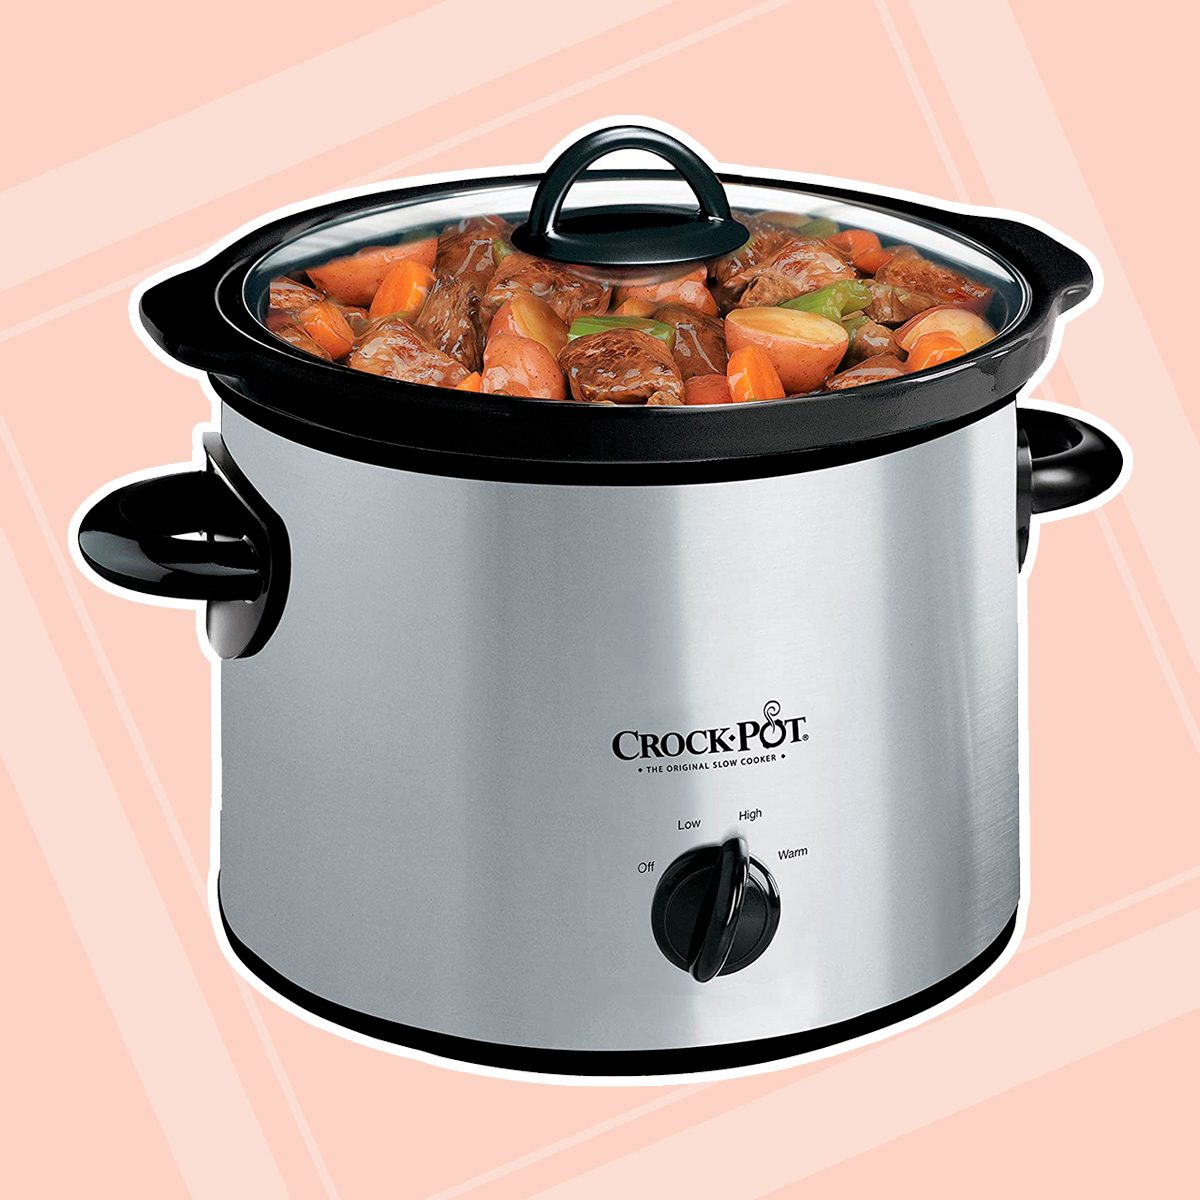 Crockpot 3-Quart Round Manual Slow Cooker, Stainless Steel and Black - SCR300-SS